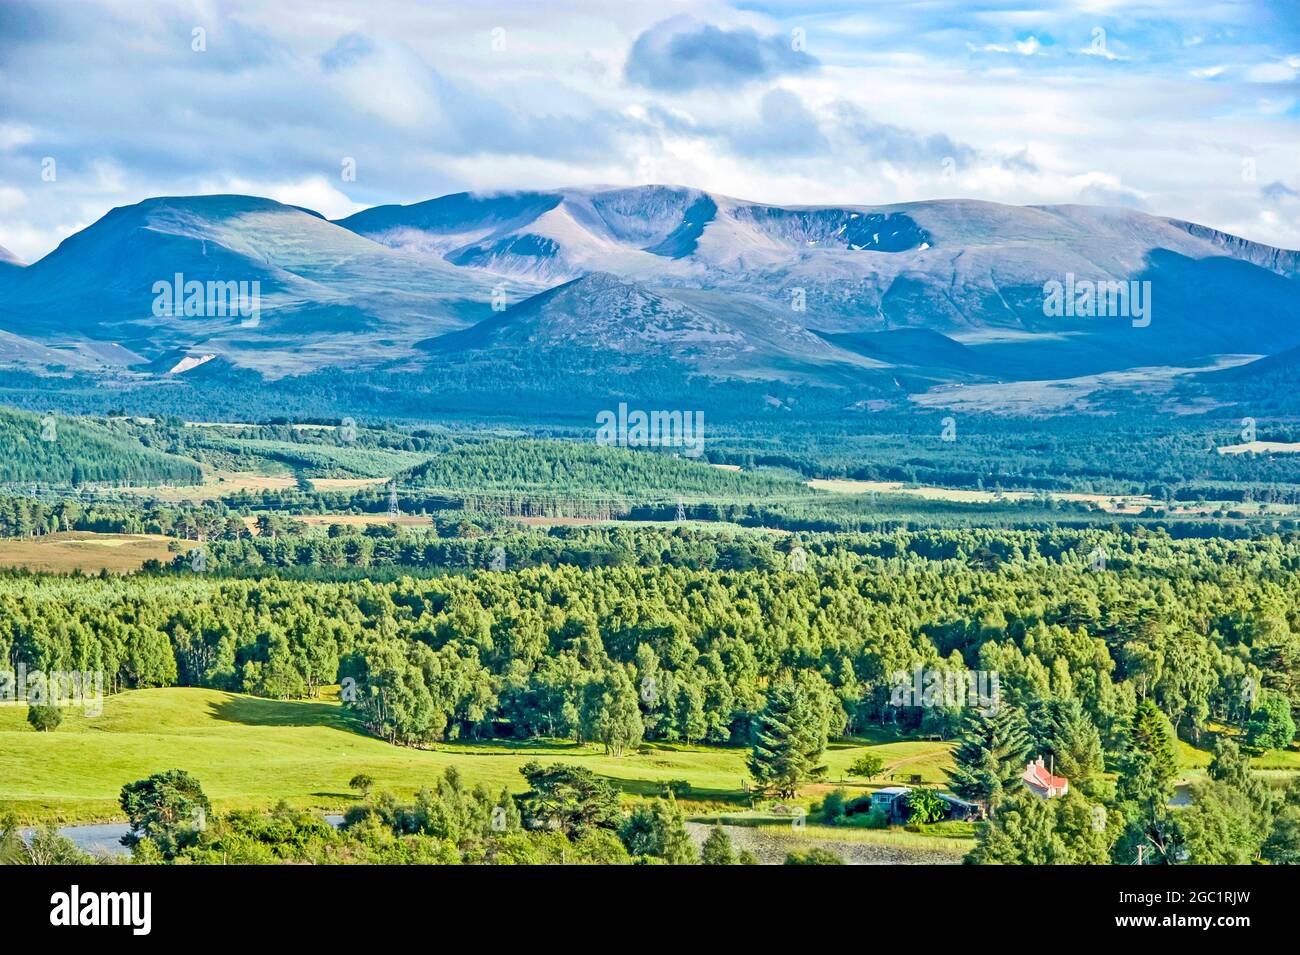 Looking east towards Braeriach mountain in the Cairngorms mountains range near Aviemore Strathspey Highland Scotland Stock Photo